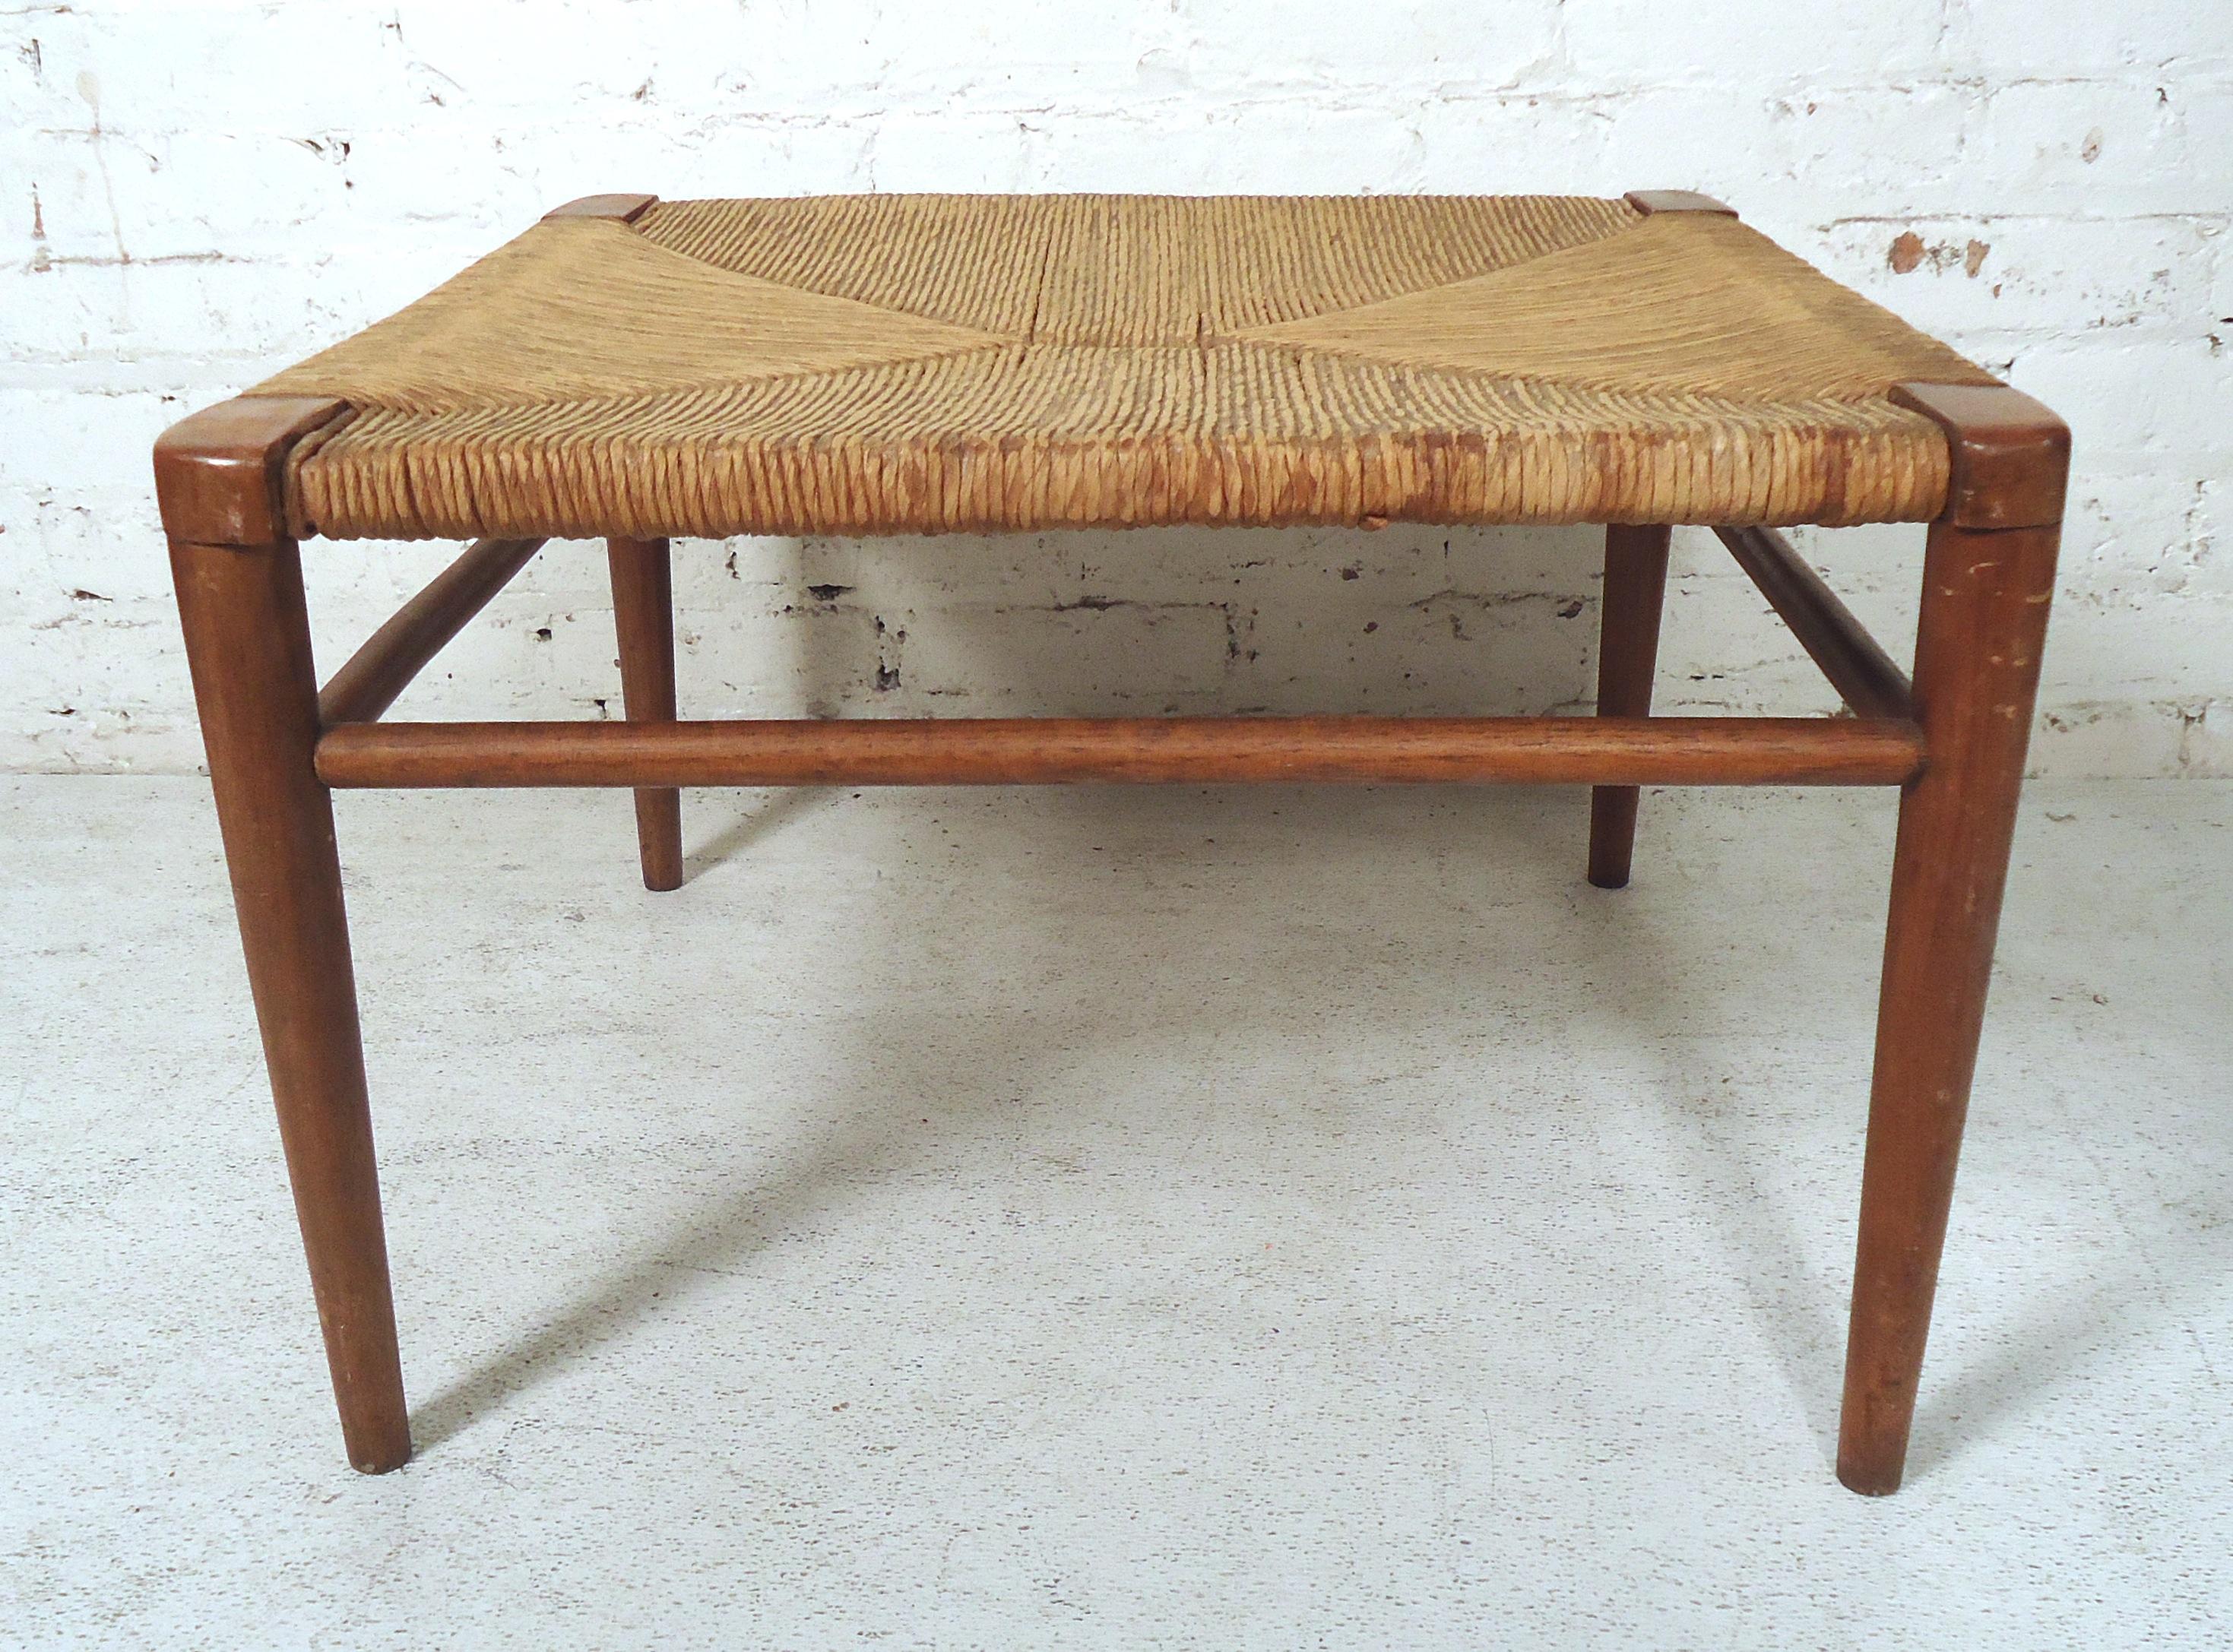 Beautiful Mid-Century Modern woven rope bench featured on rich teak grain tapered legs.

(Please confirm item location-NY or NJ-with dealer).